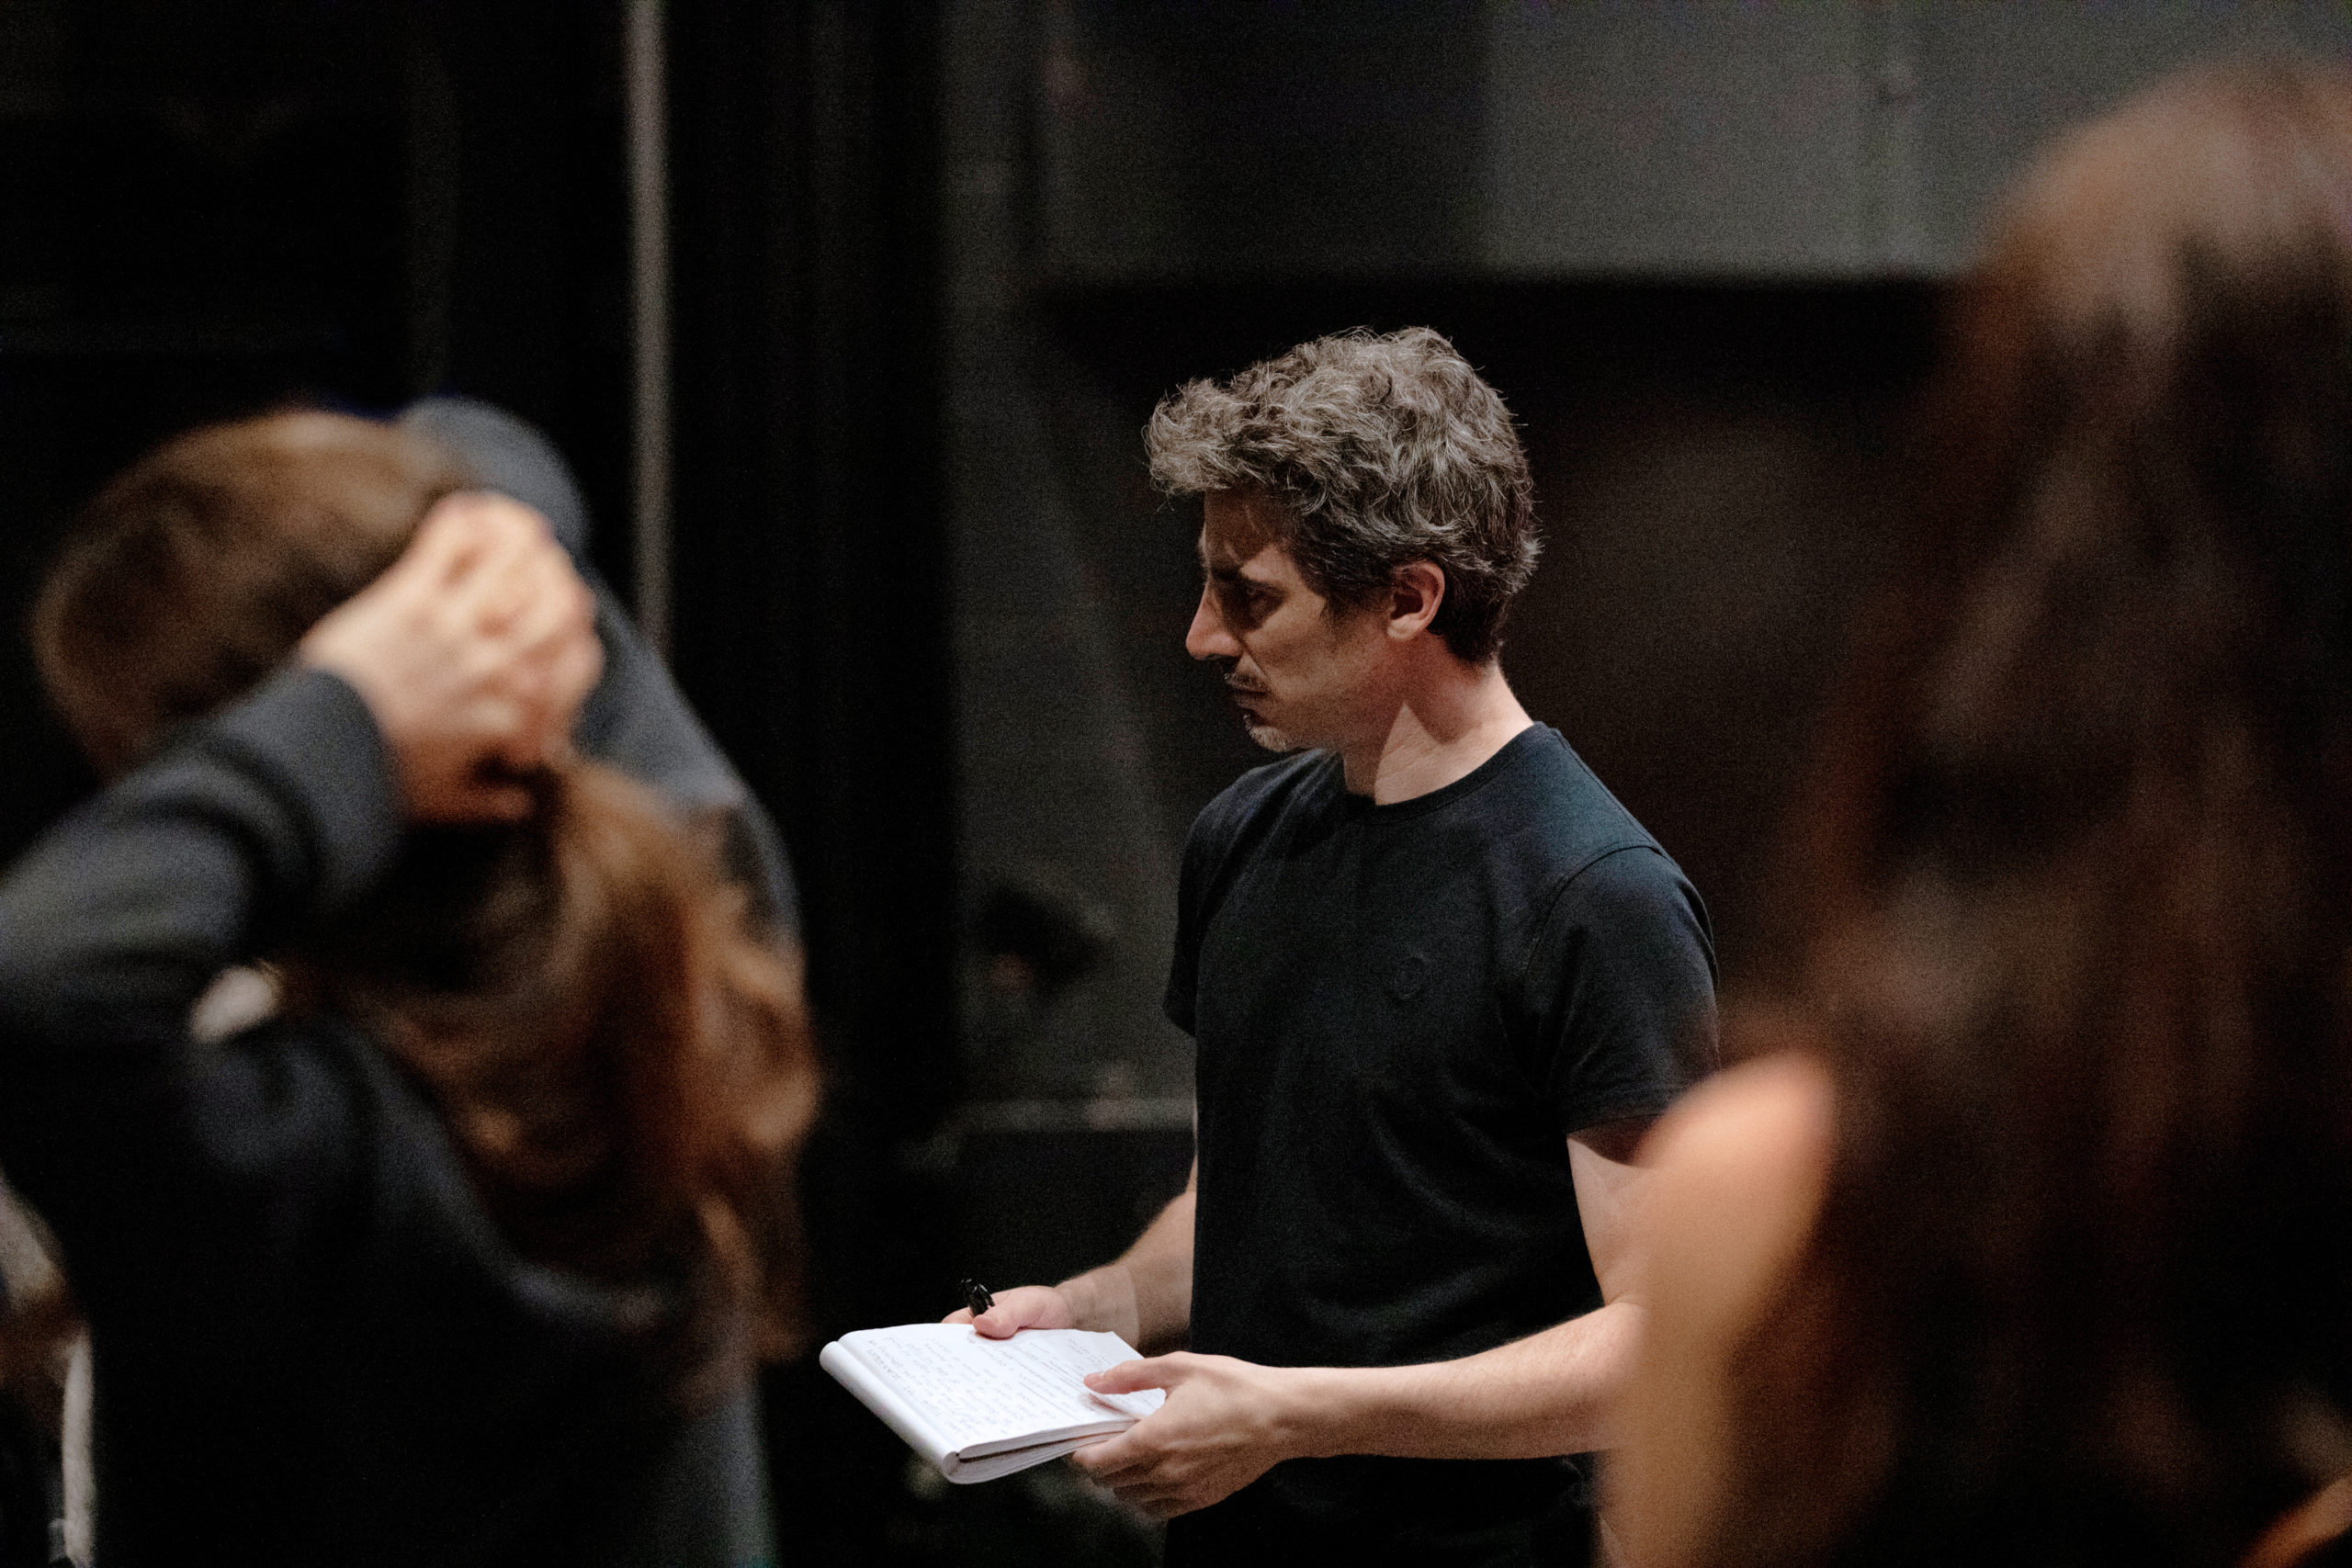 Alejandro Cerrudo, wearing a black T-shirt, is shown from the waist up, standing onstage and holding a notepad and pen. He looks towards someone off-camera. In the foreground are two women slightly out of focus.